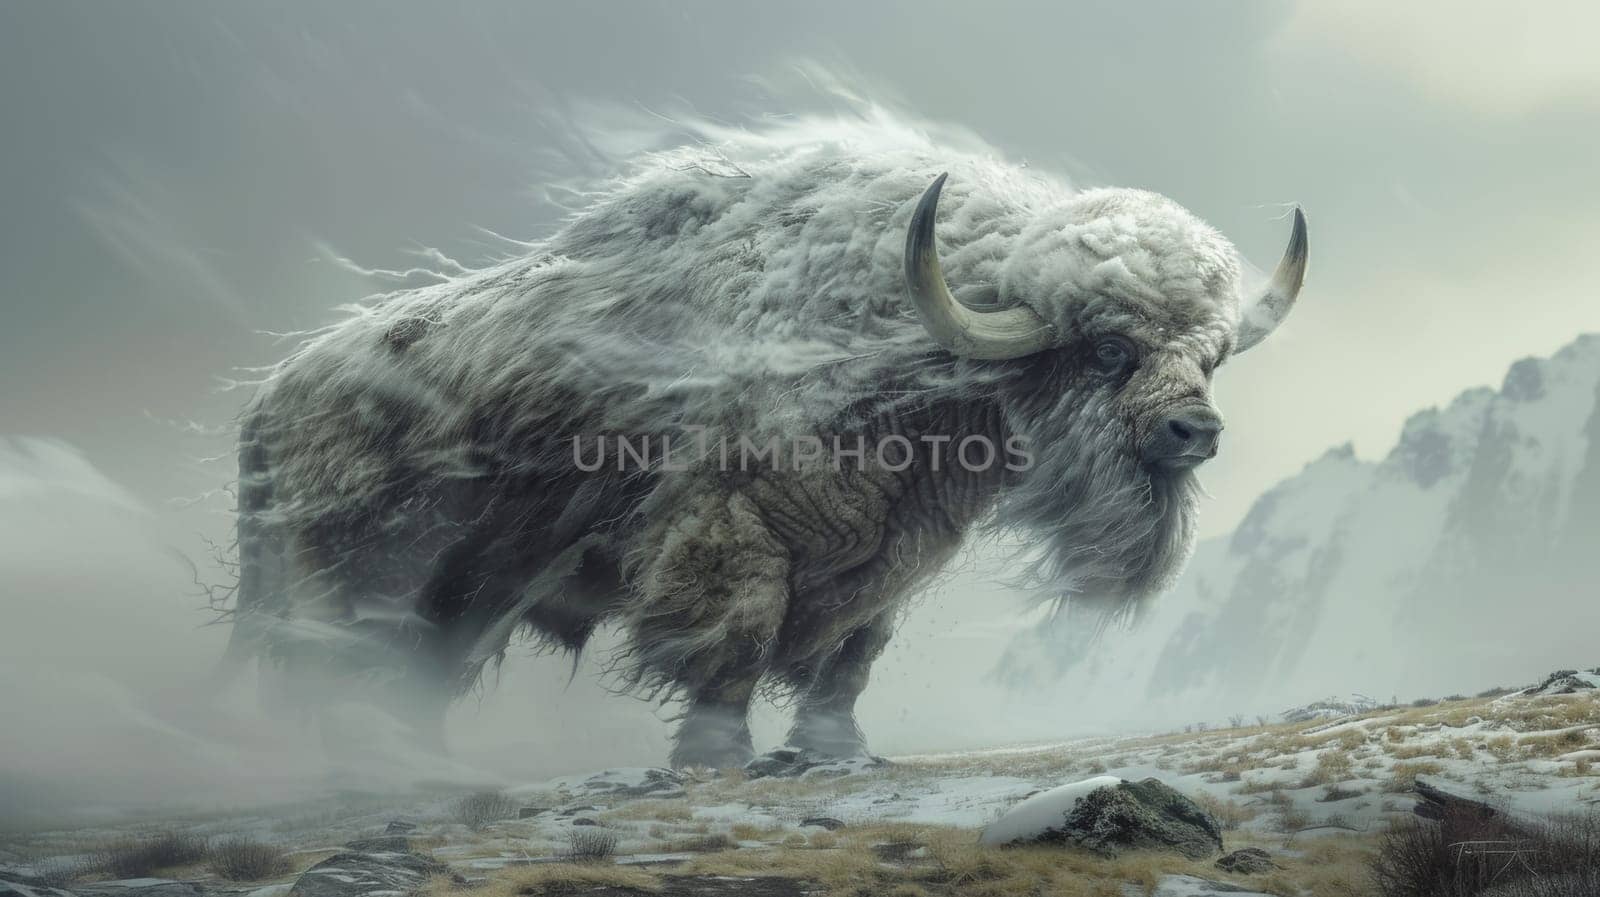 A yak is standing on a snowy hillside with snow blowing in the wind